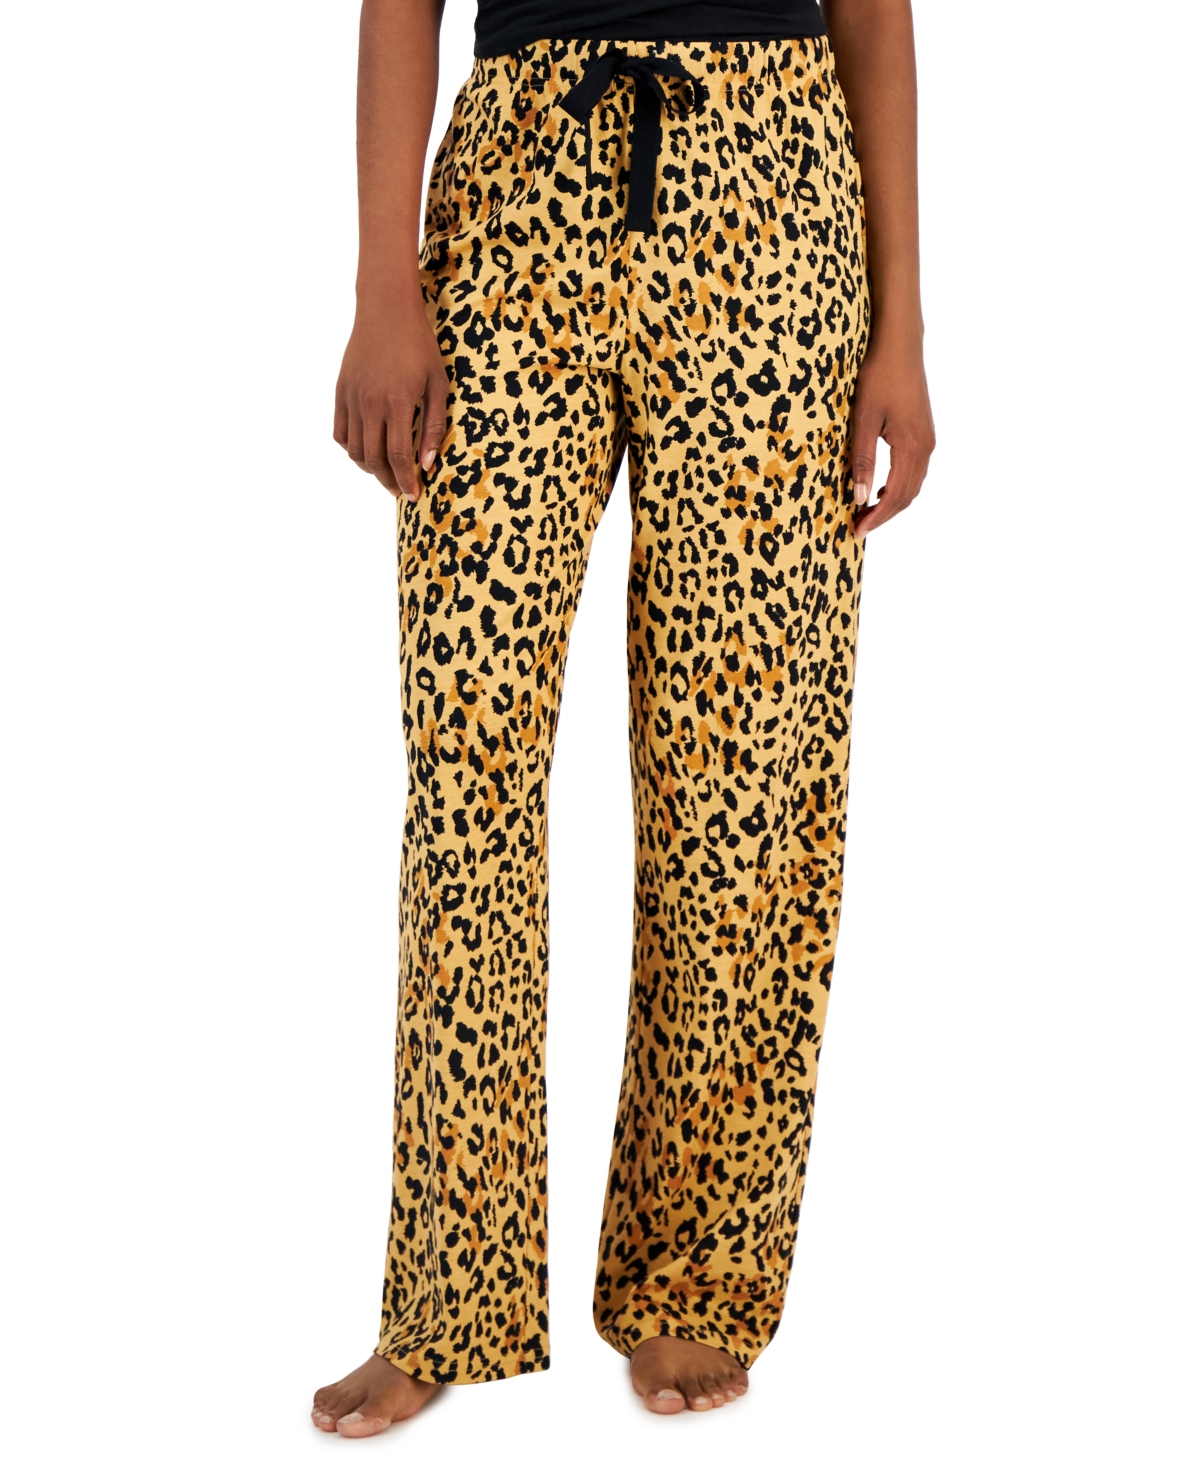 Women's Printed Wide-Leg Pajama Pants, Created for Macy's - Animal Scratch